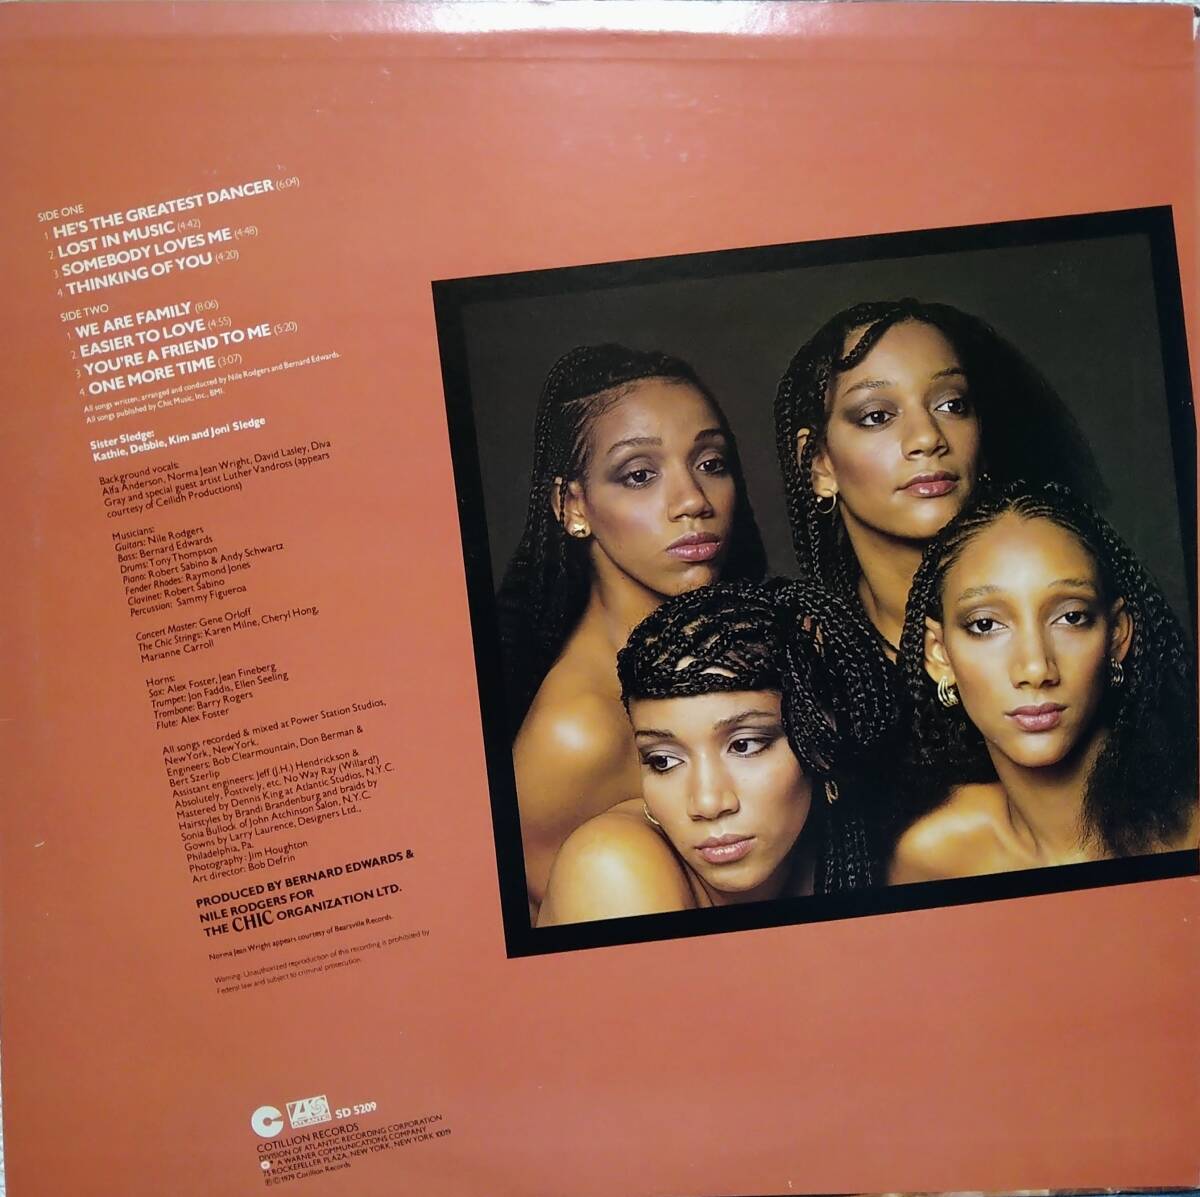 【LP Soul】Sister Sledge「We Are Family」JPN盤 He's The Greatest Dancer.Thinking Of You.We Are Family.他 収録！_裏ジャケット